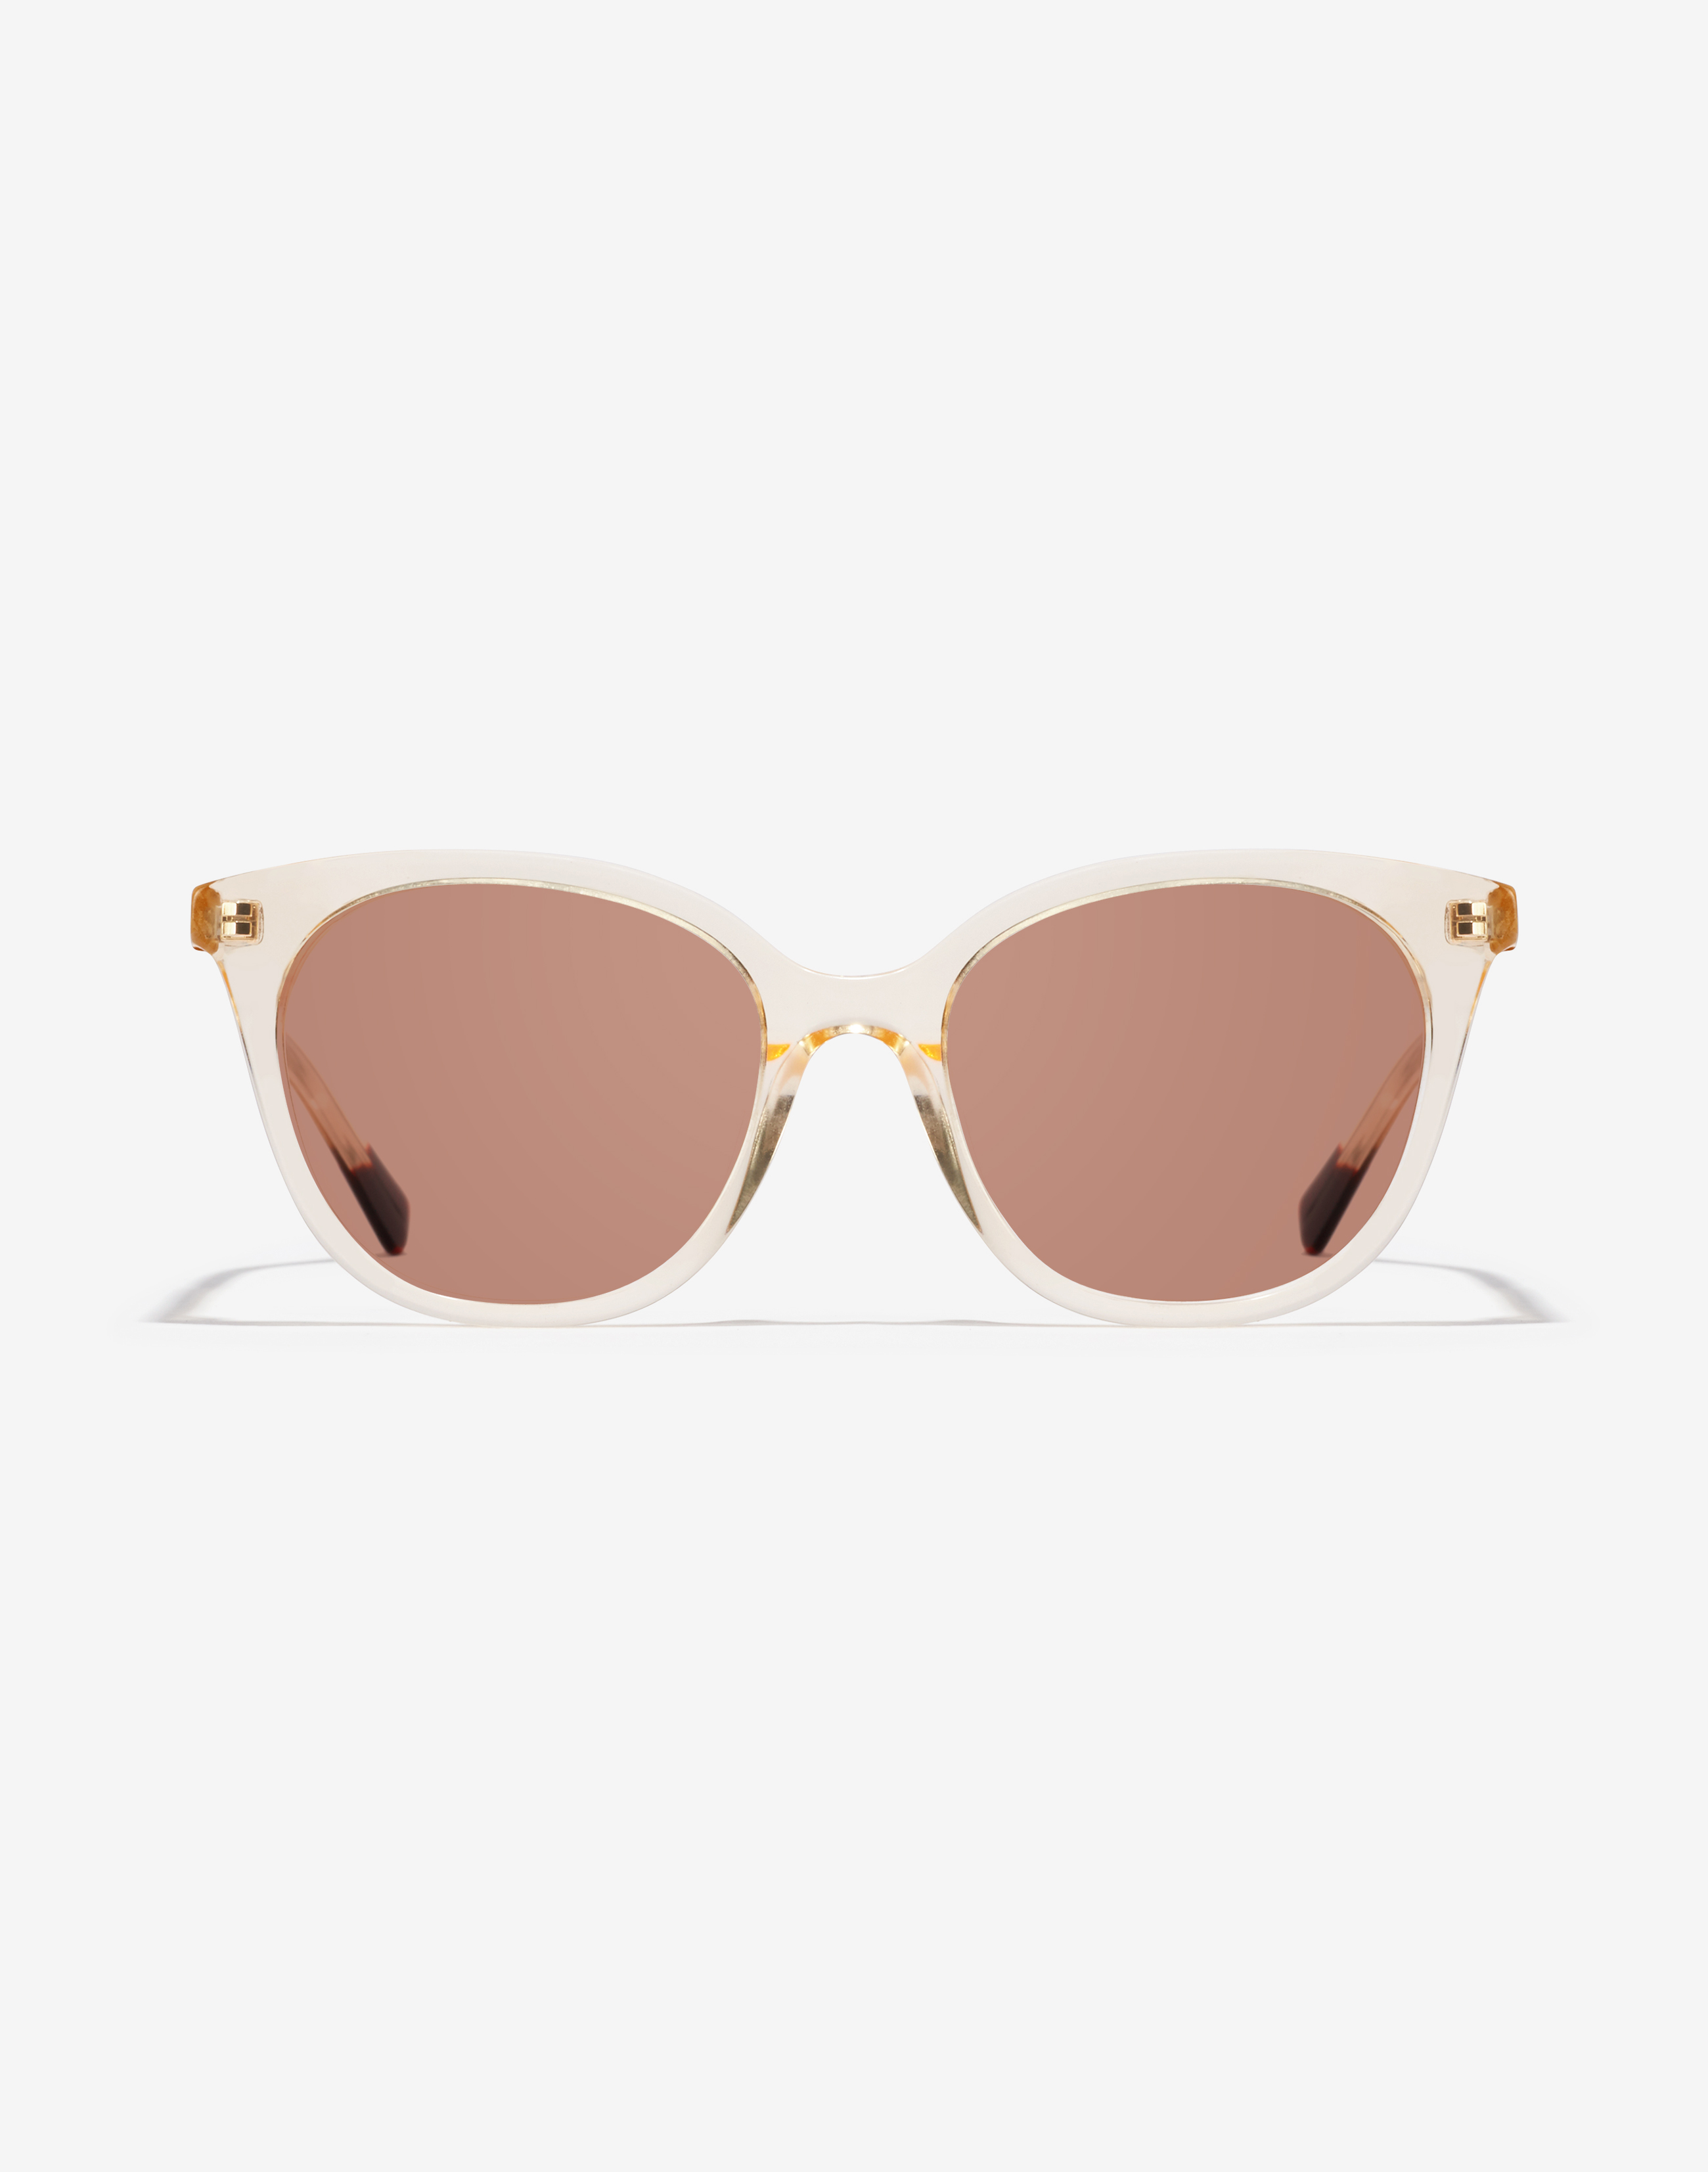 /on/demandware.static/-/Sites-Master-Catalog-Graduadas/default/dw12a3a817/images/modal_colored/hawkers_eyewear-crystal-champagne-riesling-320098-brown.jpg